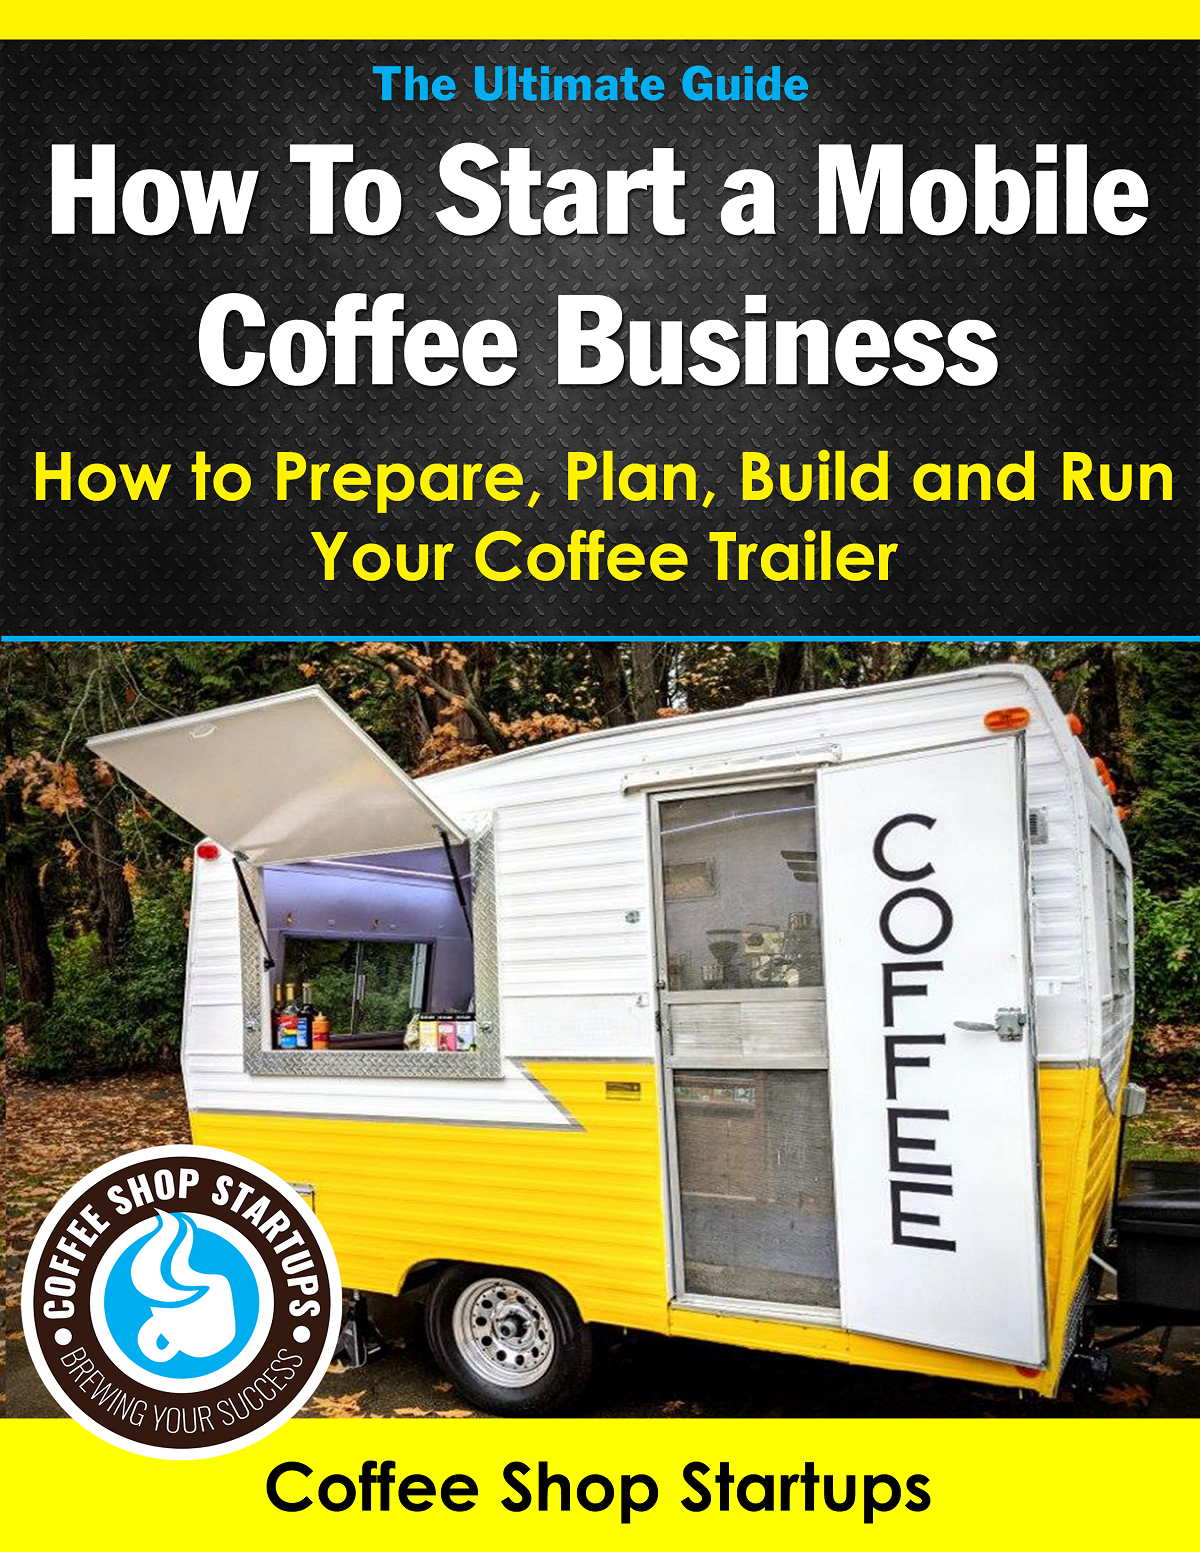 Mobile Coffee Business Book